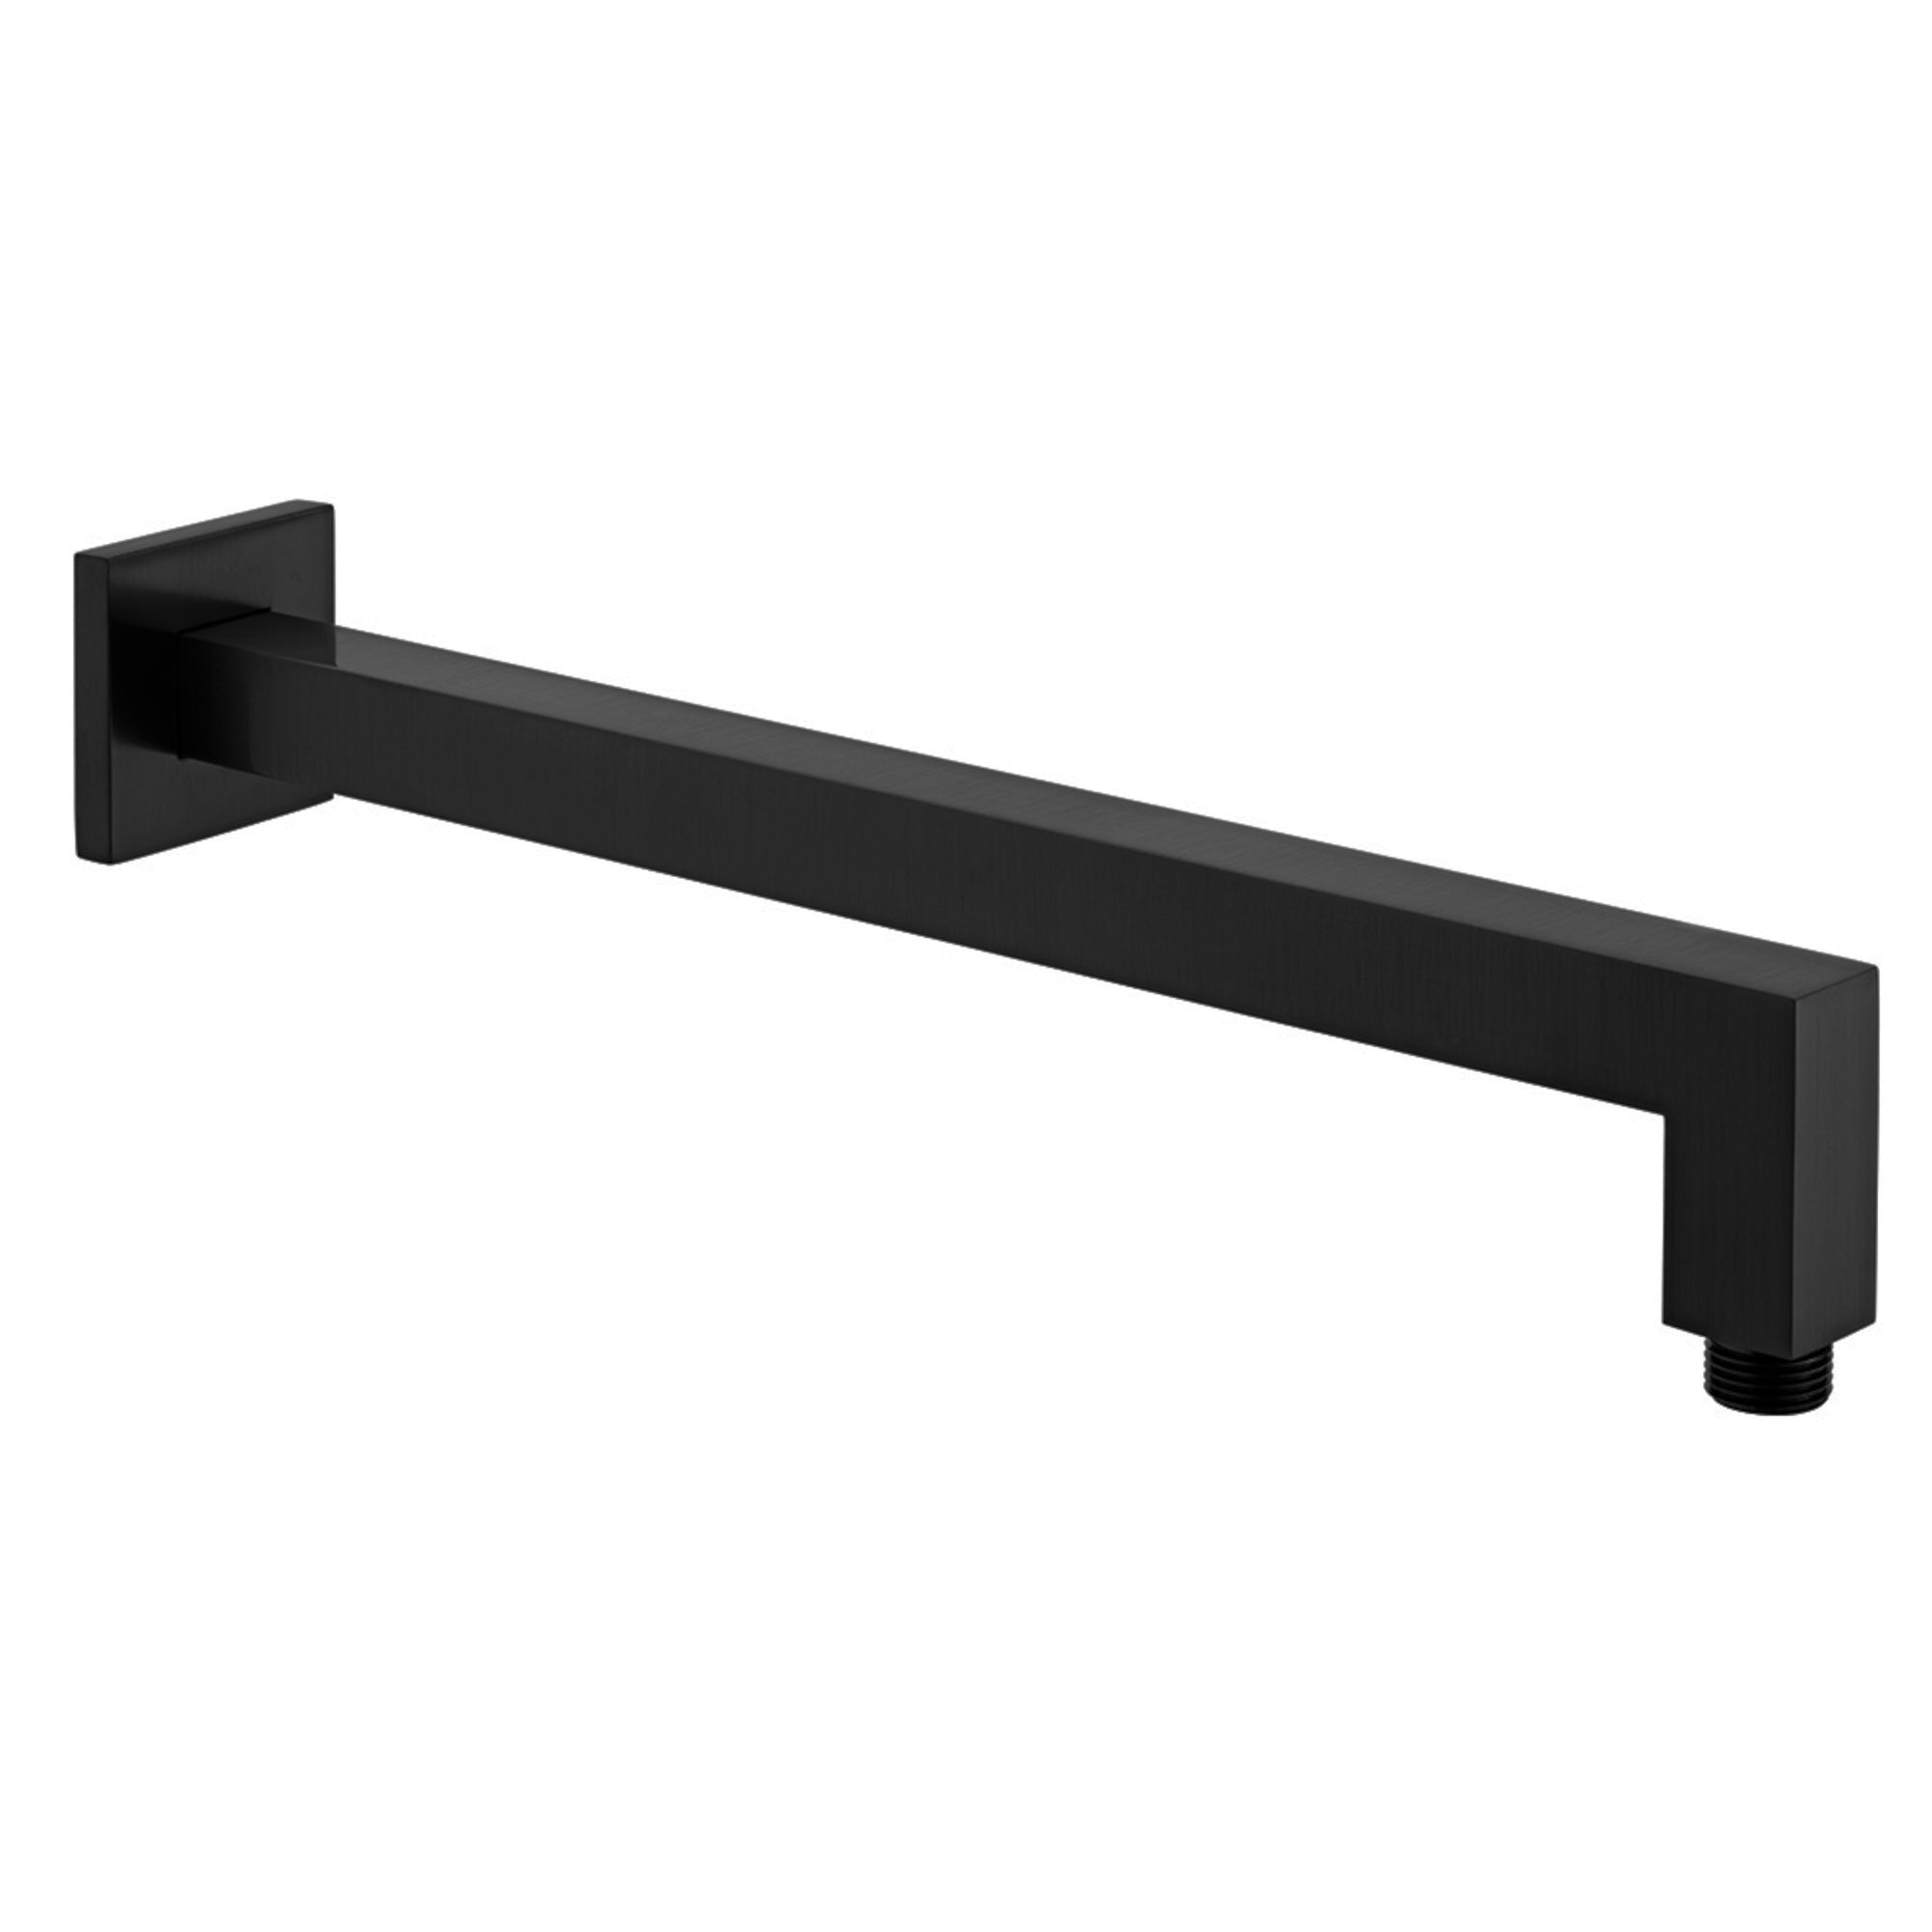 Square wall mounted 90 degree bend shower arm 370mm - matte black